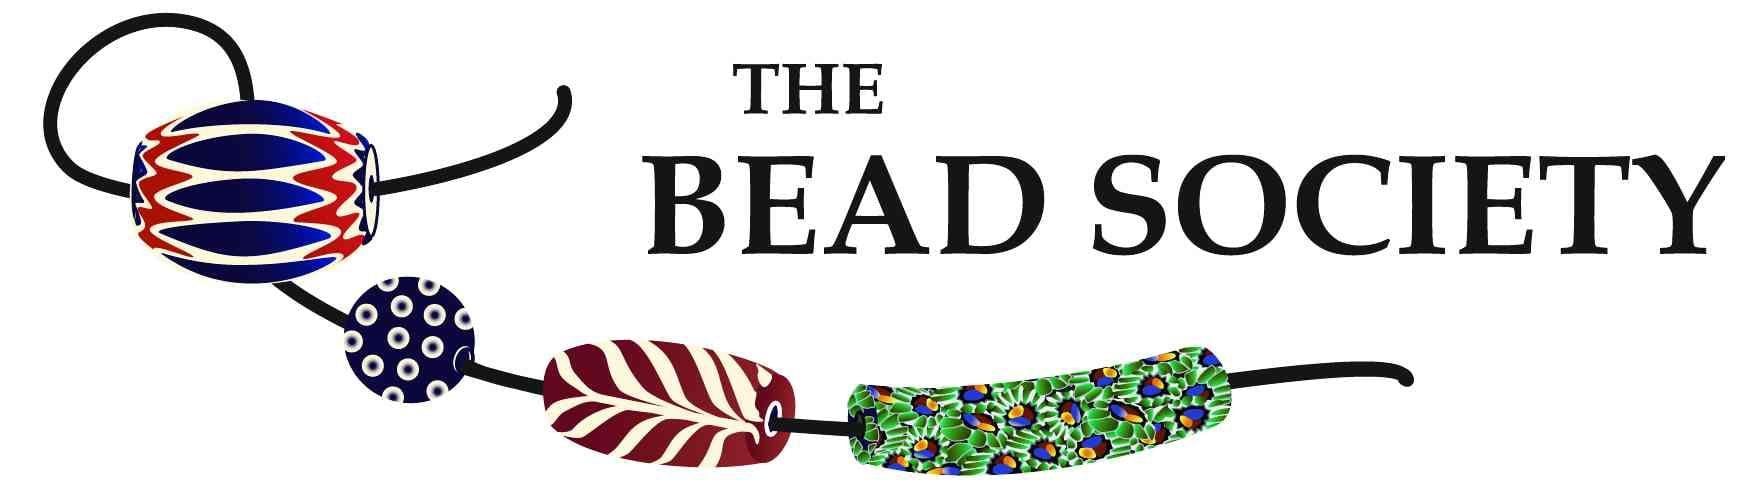 Bead Logo - The Bead Society – The oldest Bead Society of its kind in the United ...